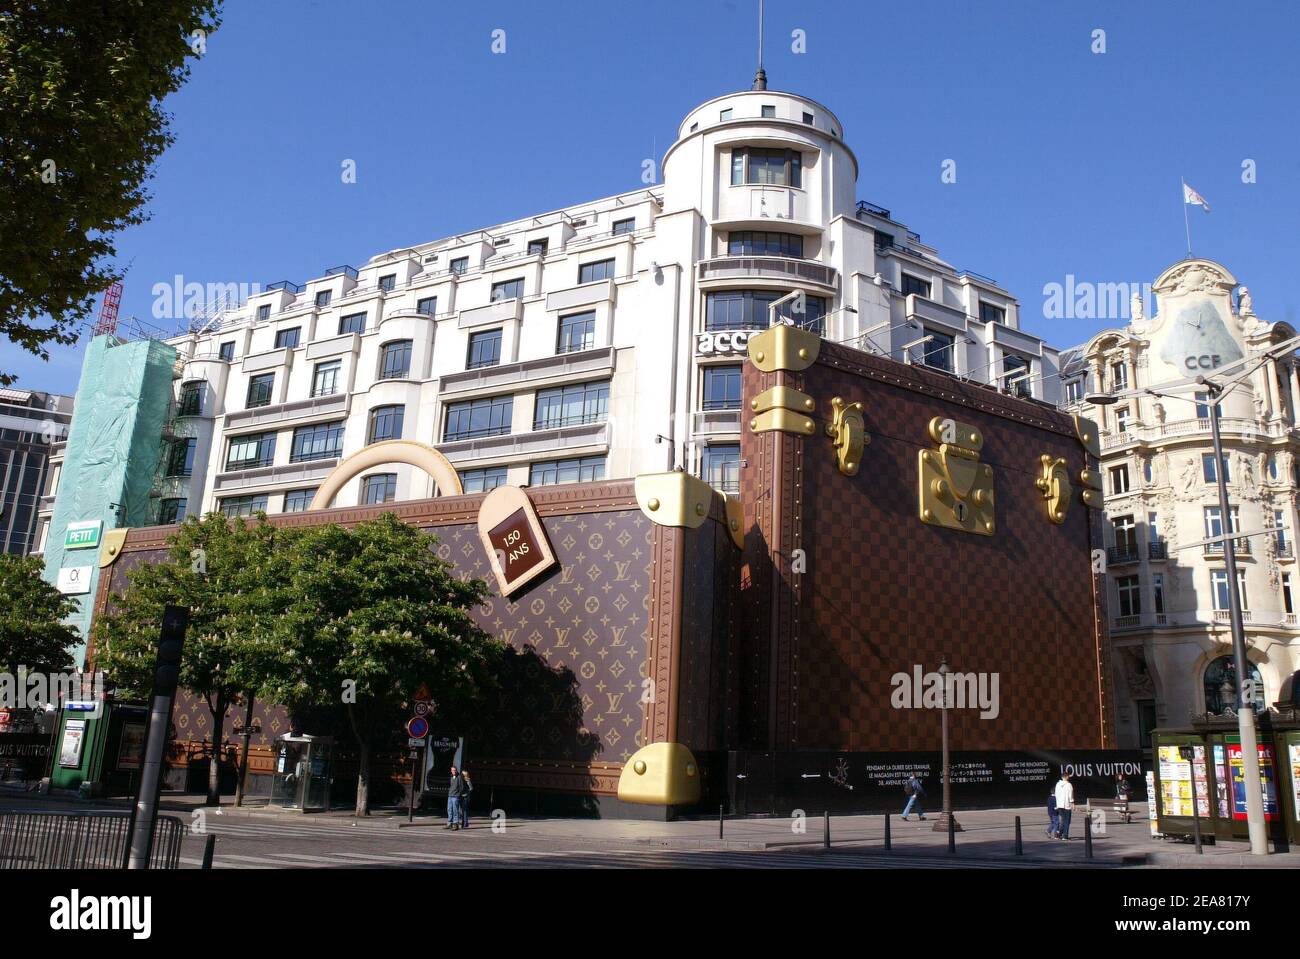 The Louis Vuitton store on the Champs Elysees in Paris, on